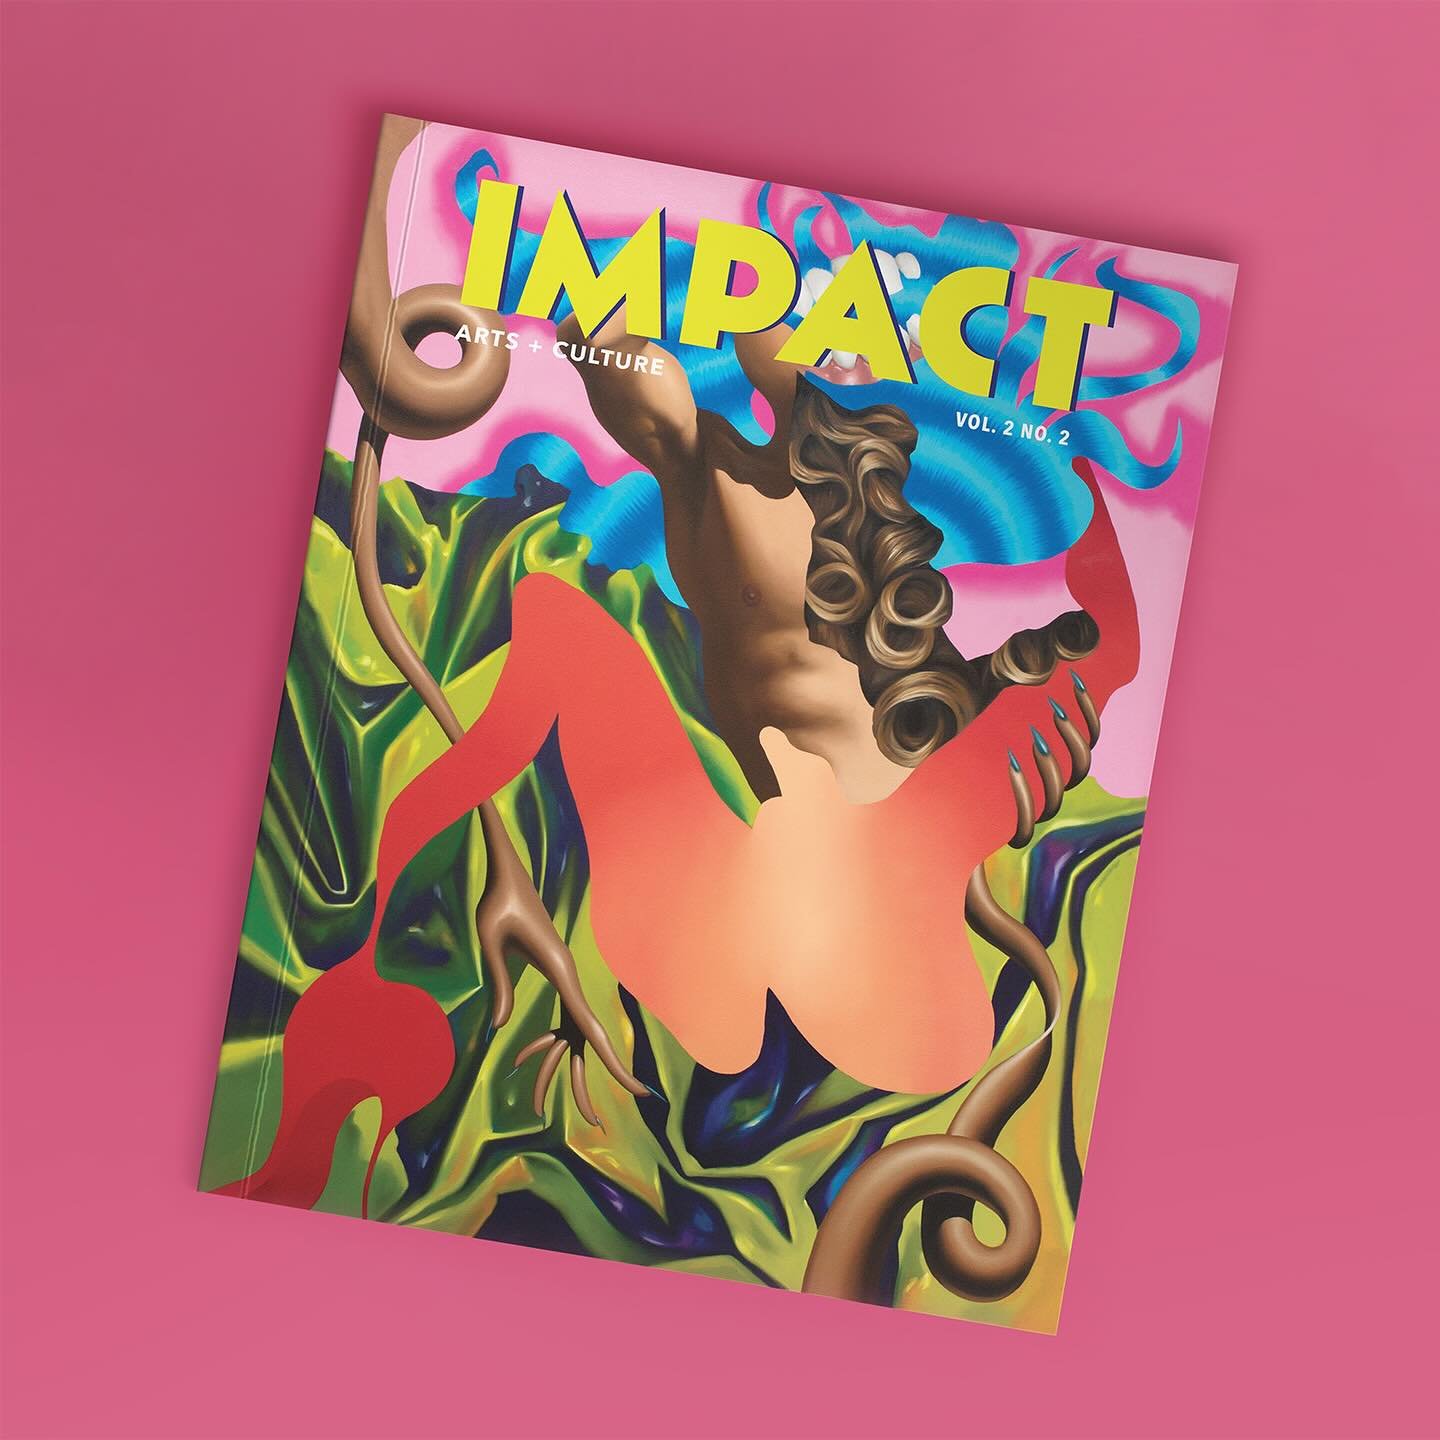 IMPACT Vol. 2 No. 2, released Fall 2023, is now available to read online! Visit artssoutheast.org/stories for digital features: 

&bull;Leia Genis&rsquo; Top 10 Books of 2023 @leiagenis
&bull;&ldquo;Force Majeure: A Conversation with James Williams I